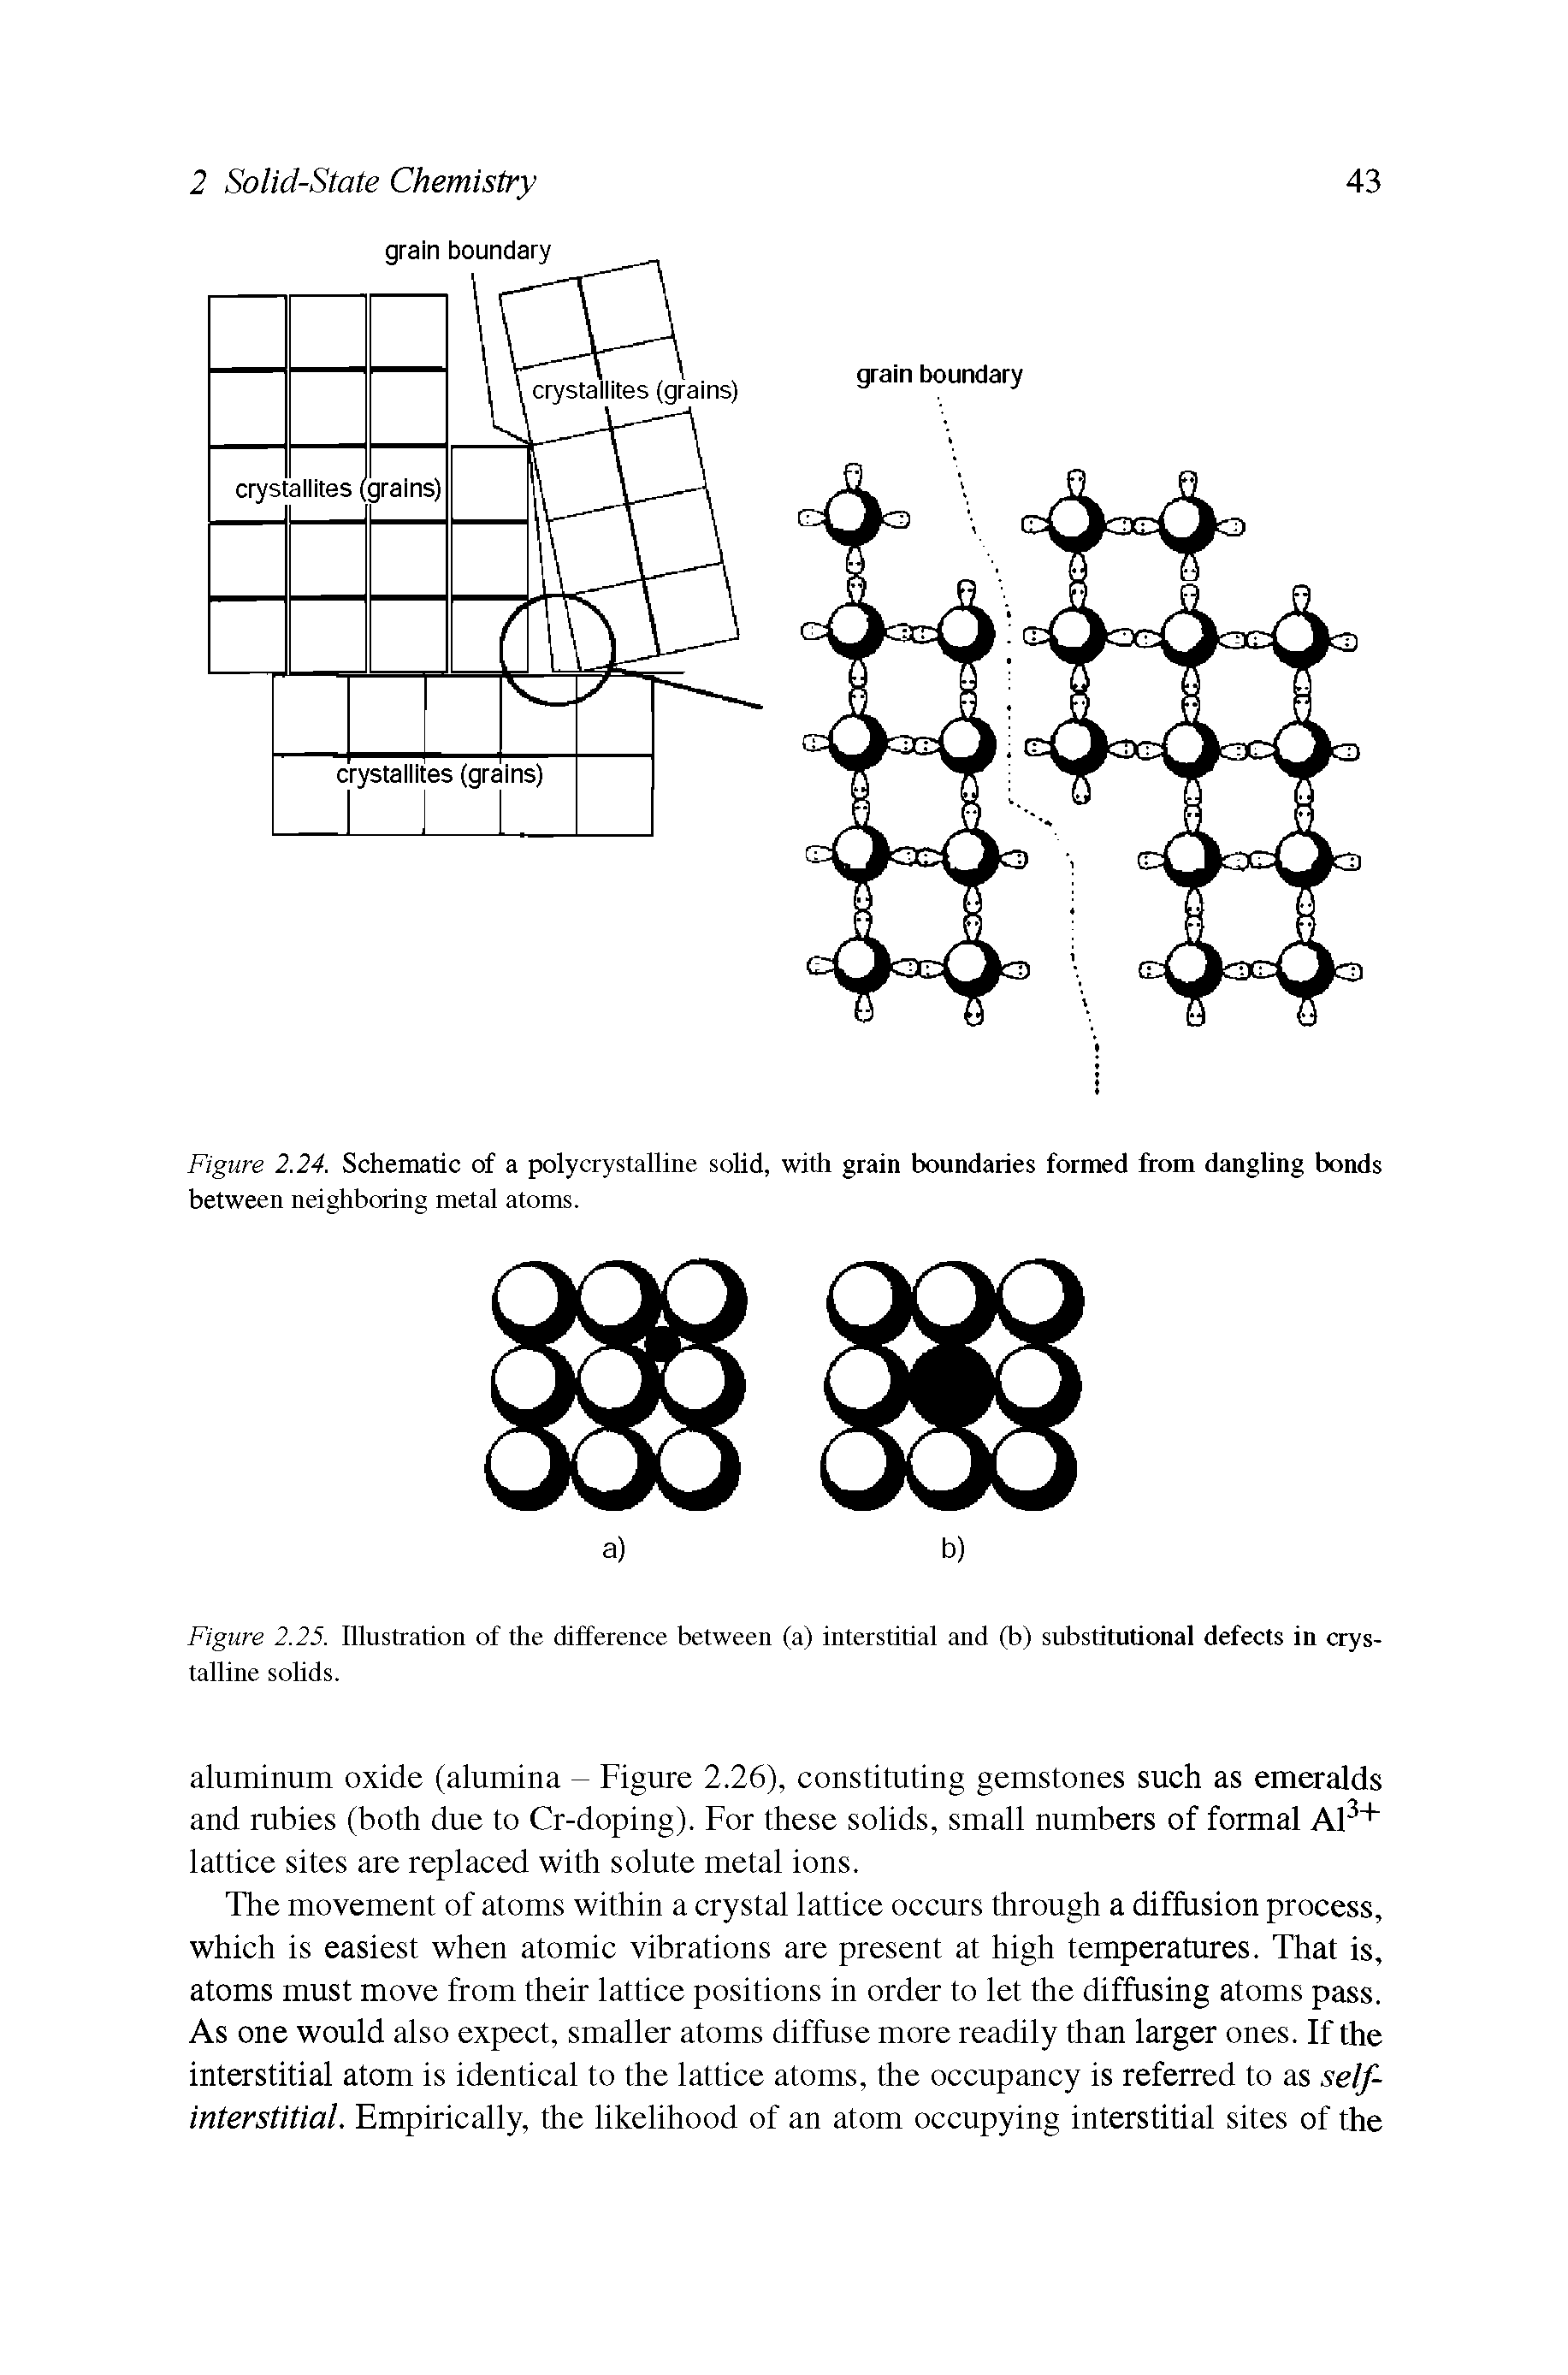 Figure 2.25. Illustration of the difference between (a) interstitial and (b) substitutional defects in crystalline solids.